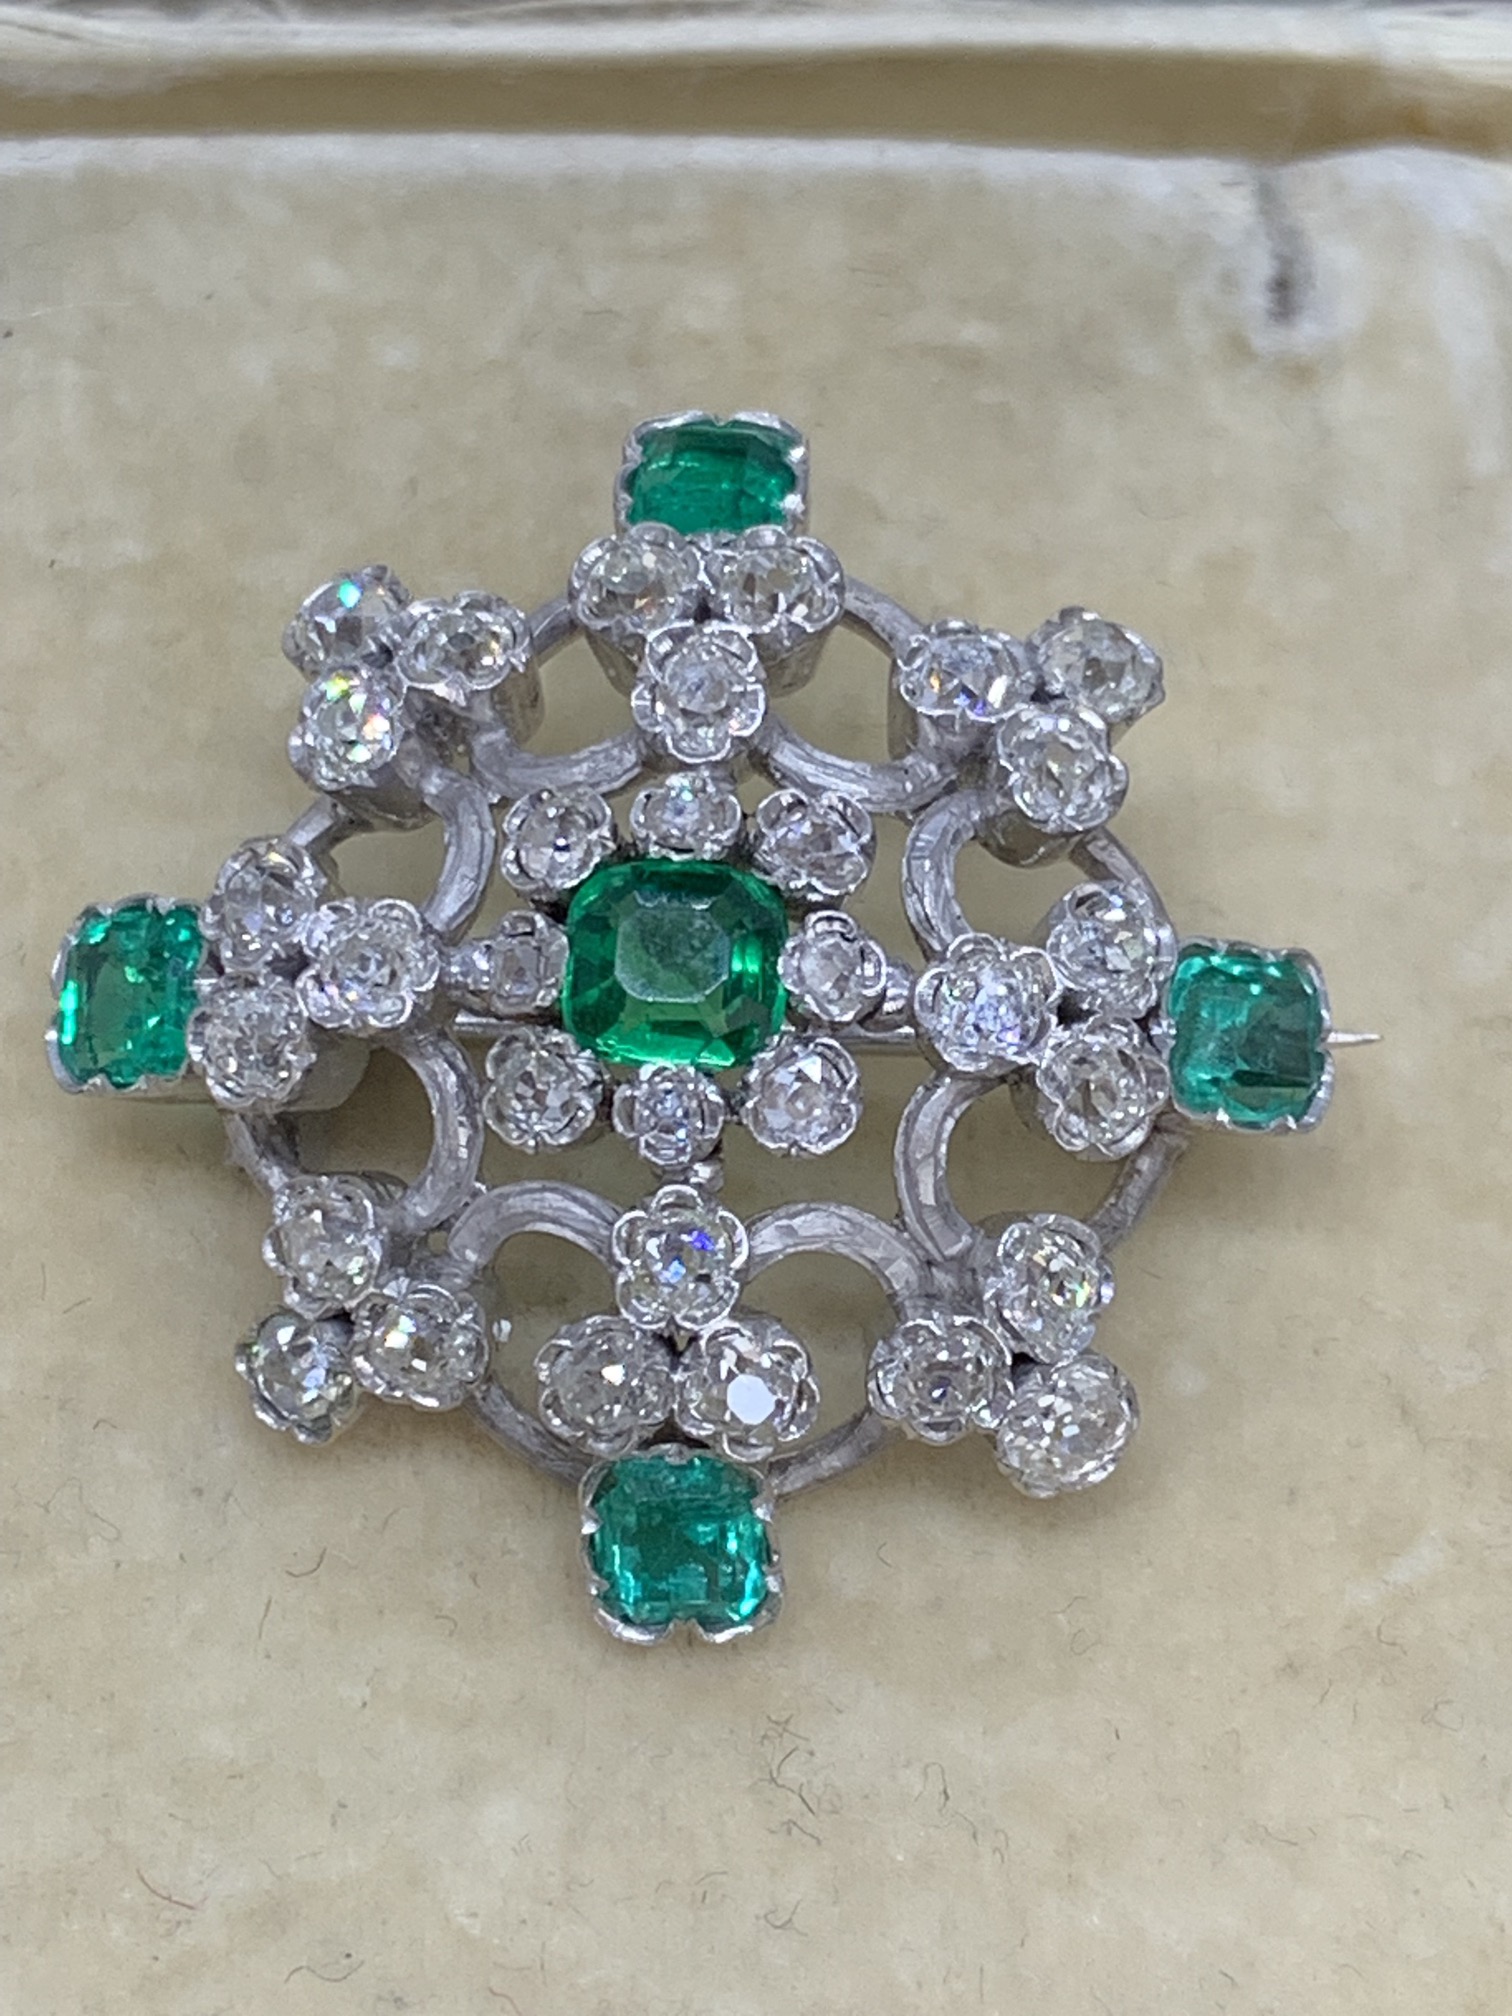 EXQUISITE EMERALD & DIAMOND BROOCH - WHITE METAL TESTED AS AT LEAST 18ct